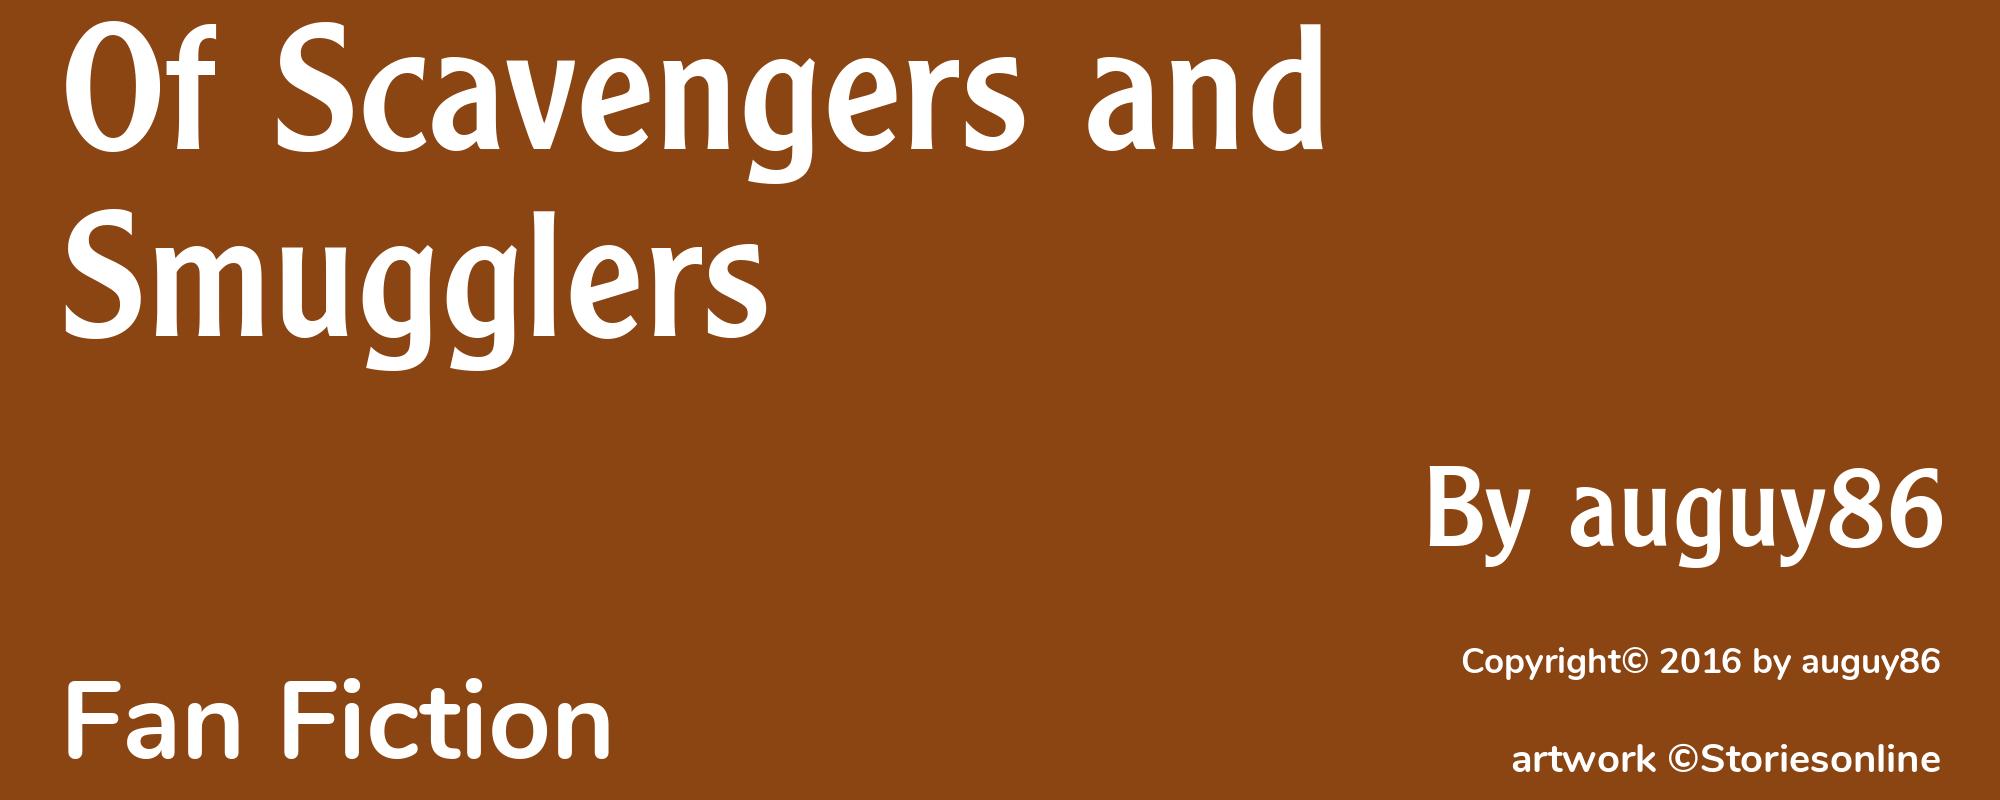 Of Scavengers and Smugglers - Cover